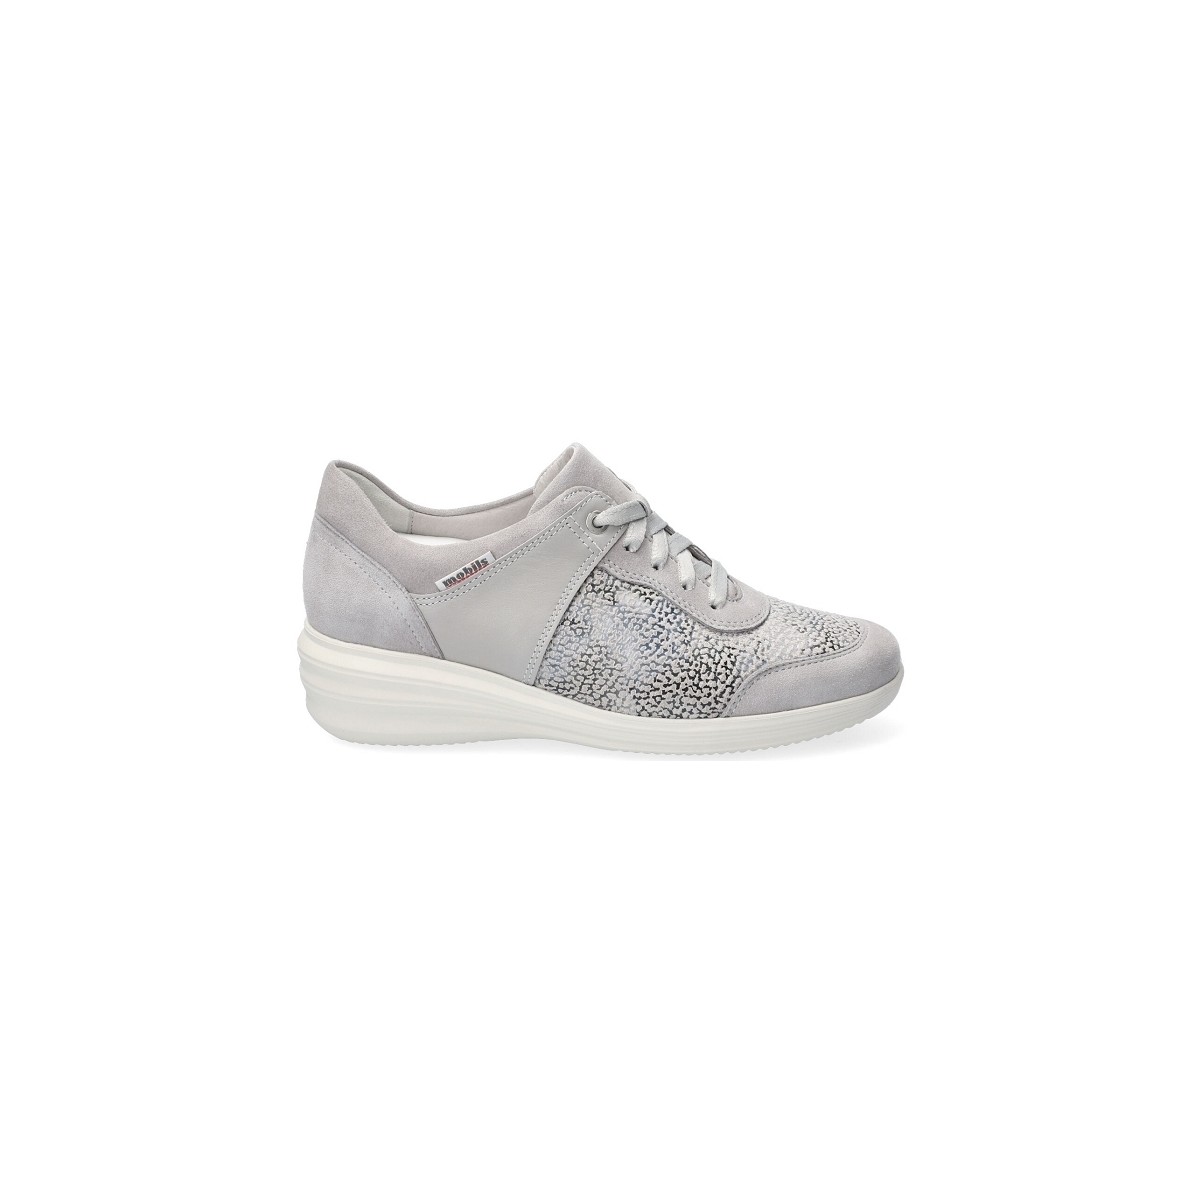 Chaussures Femme Tennis Mobils SIDONIA Gris